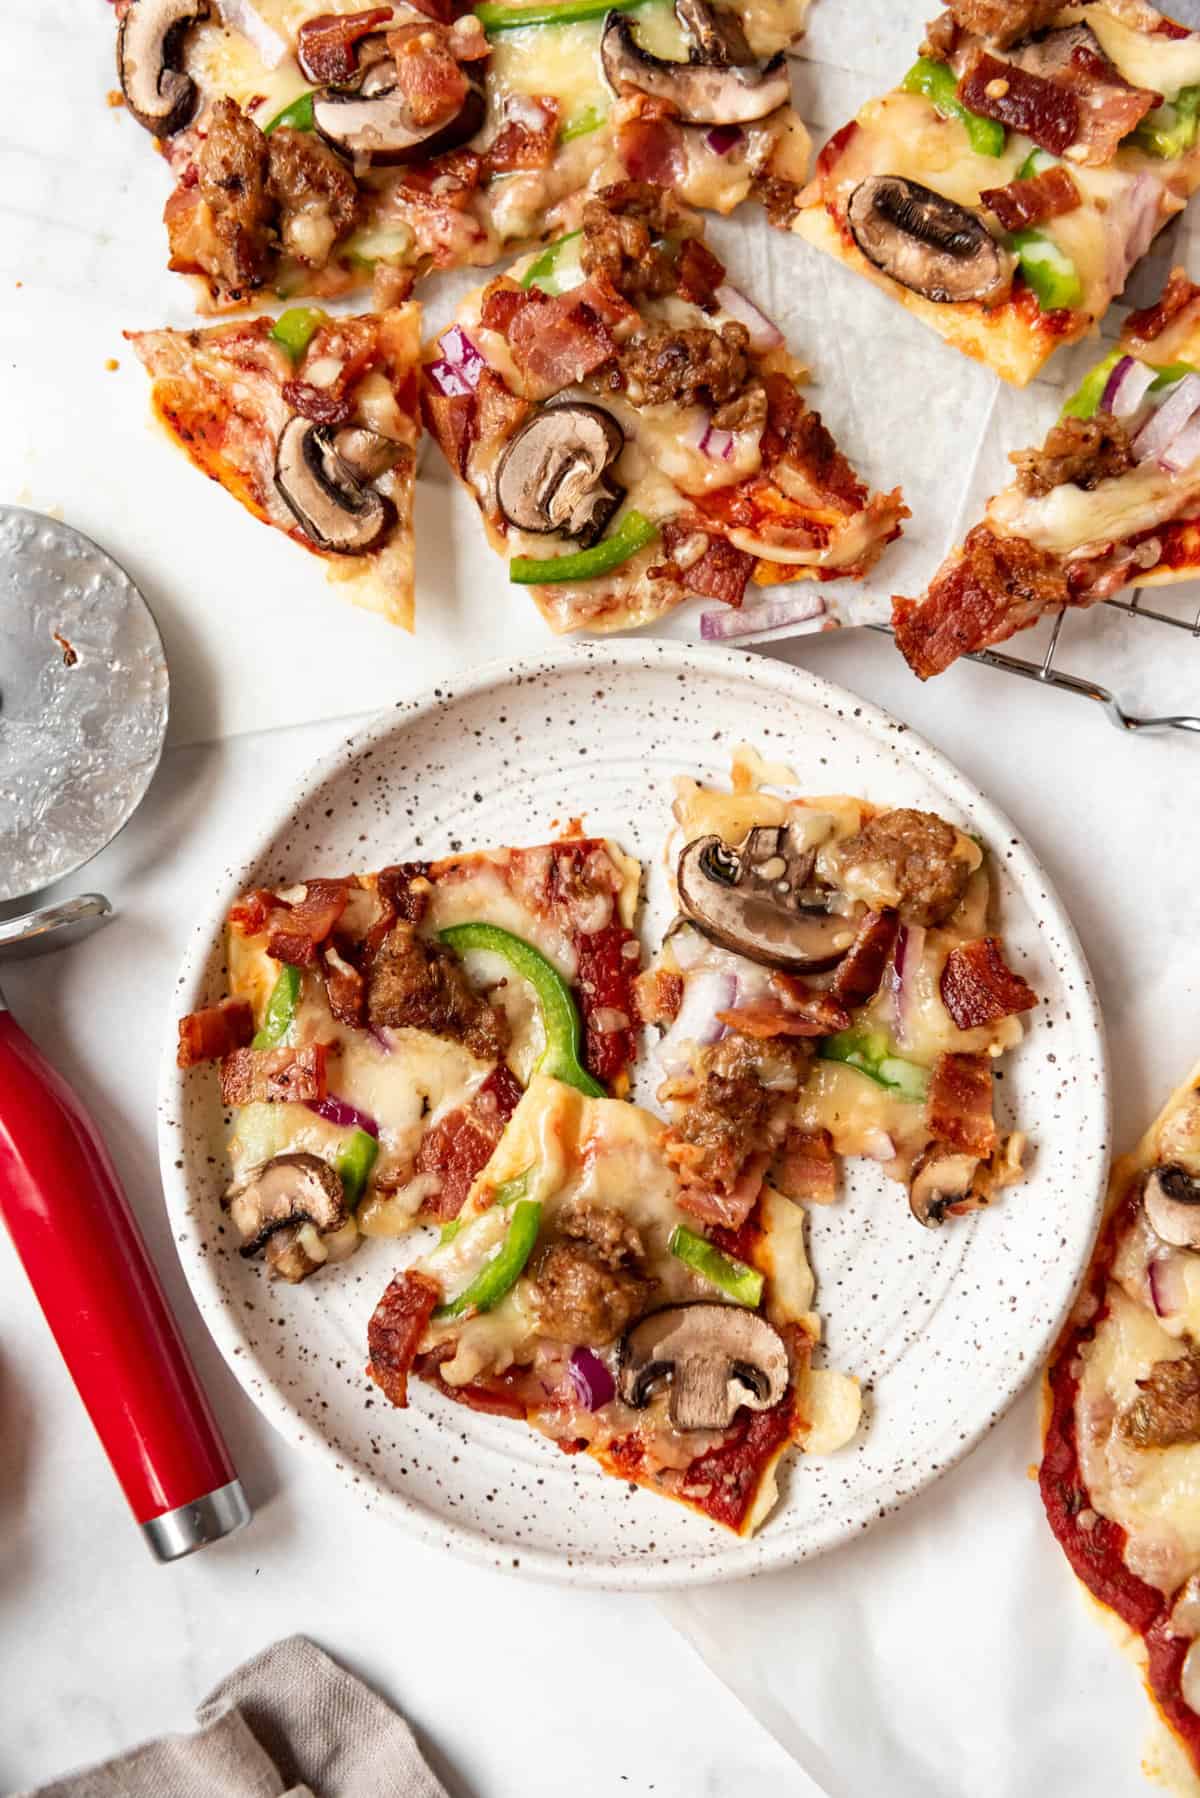 Slices of St. Louis-style pizza with meat and veggies on a plate next to a pizza cutter.